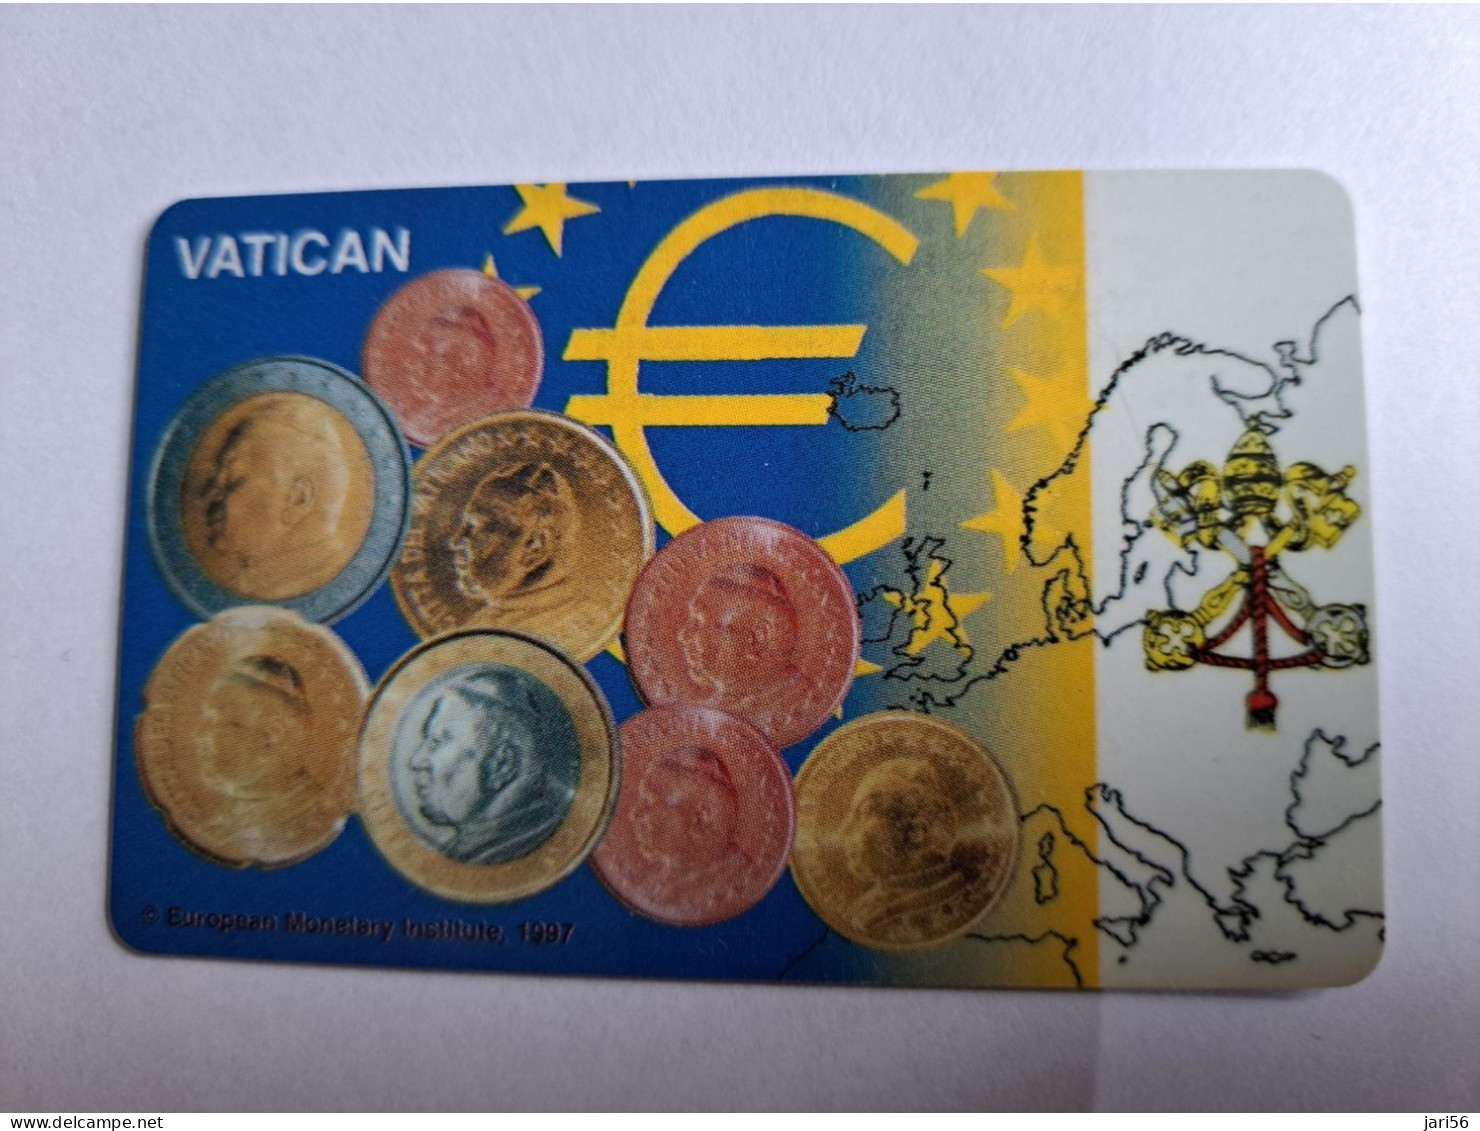 GREAT BRITAIN   20 UNITS   / EURO COINS/ VATICAN       PHONECARD   (date 12/ 2002)  PREPAID CARD / MINT      **12916** - Collections